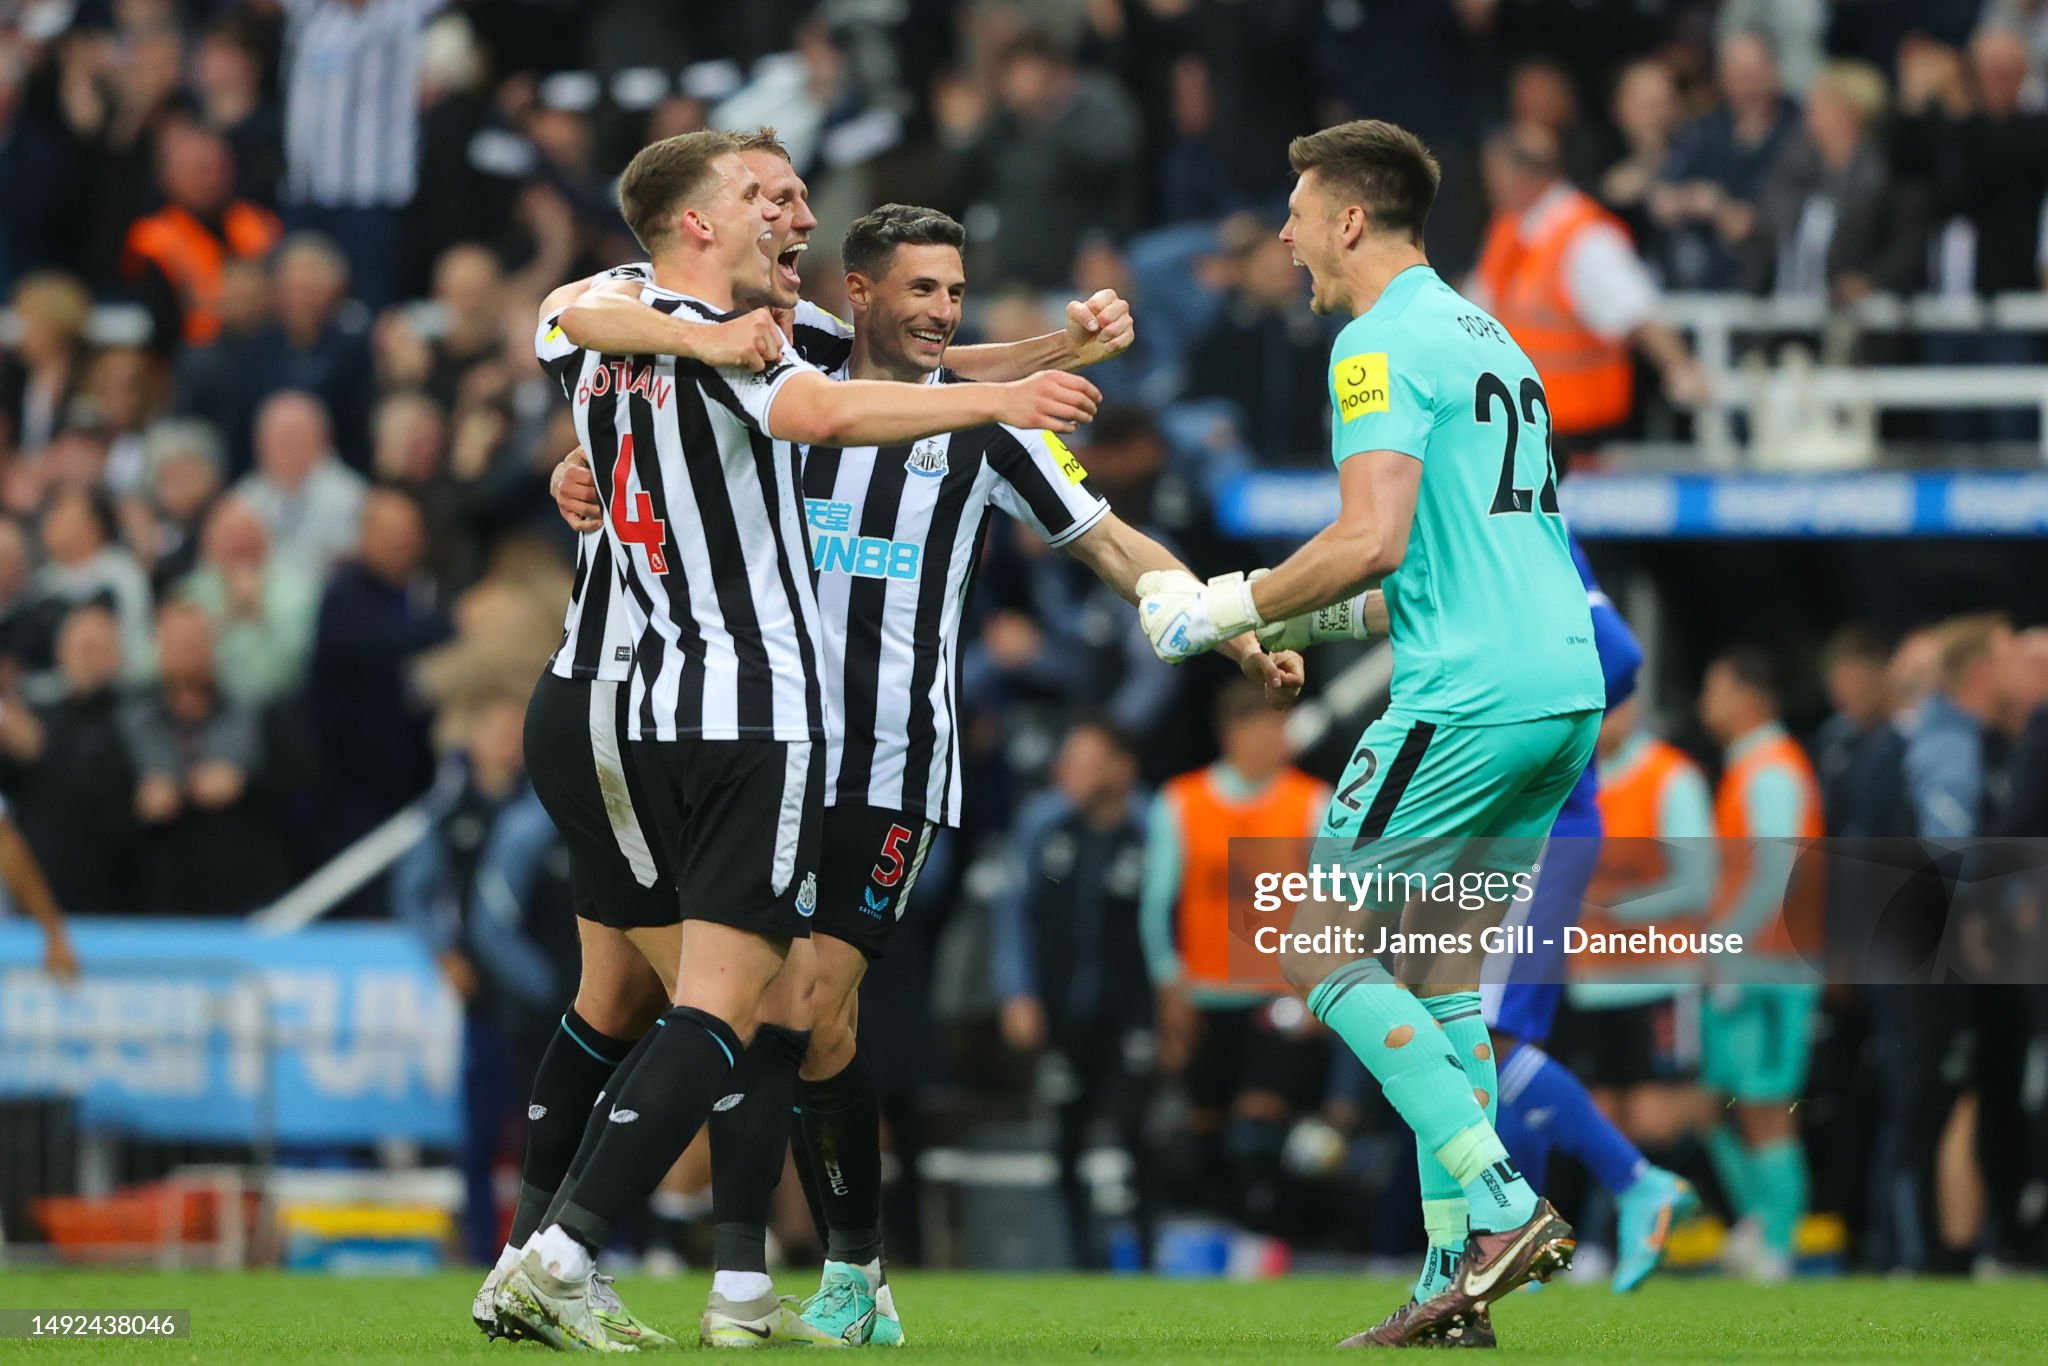 Newcastle United back in the Champions League after twenty years; Leicester City on the verge of relegation